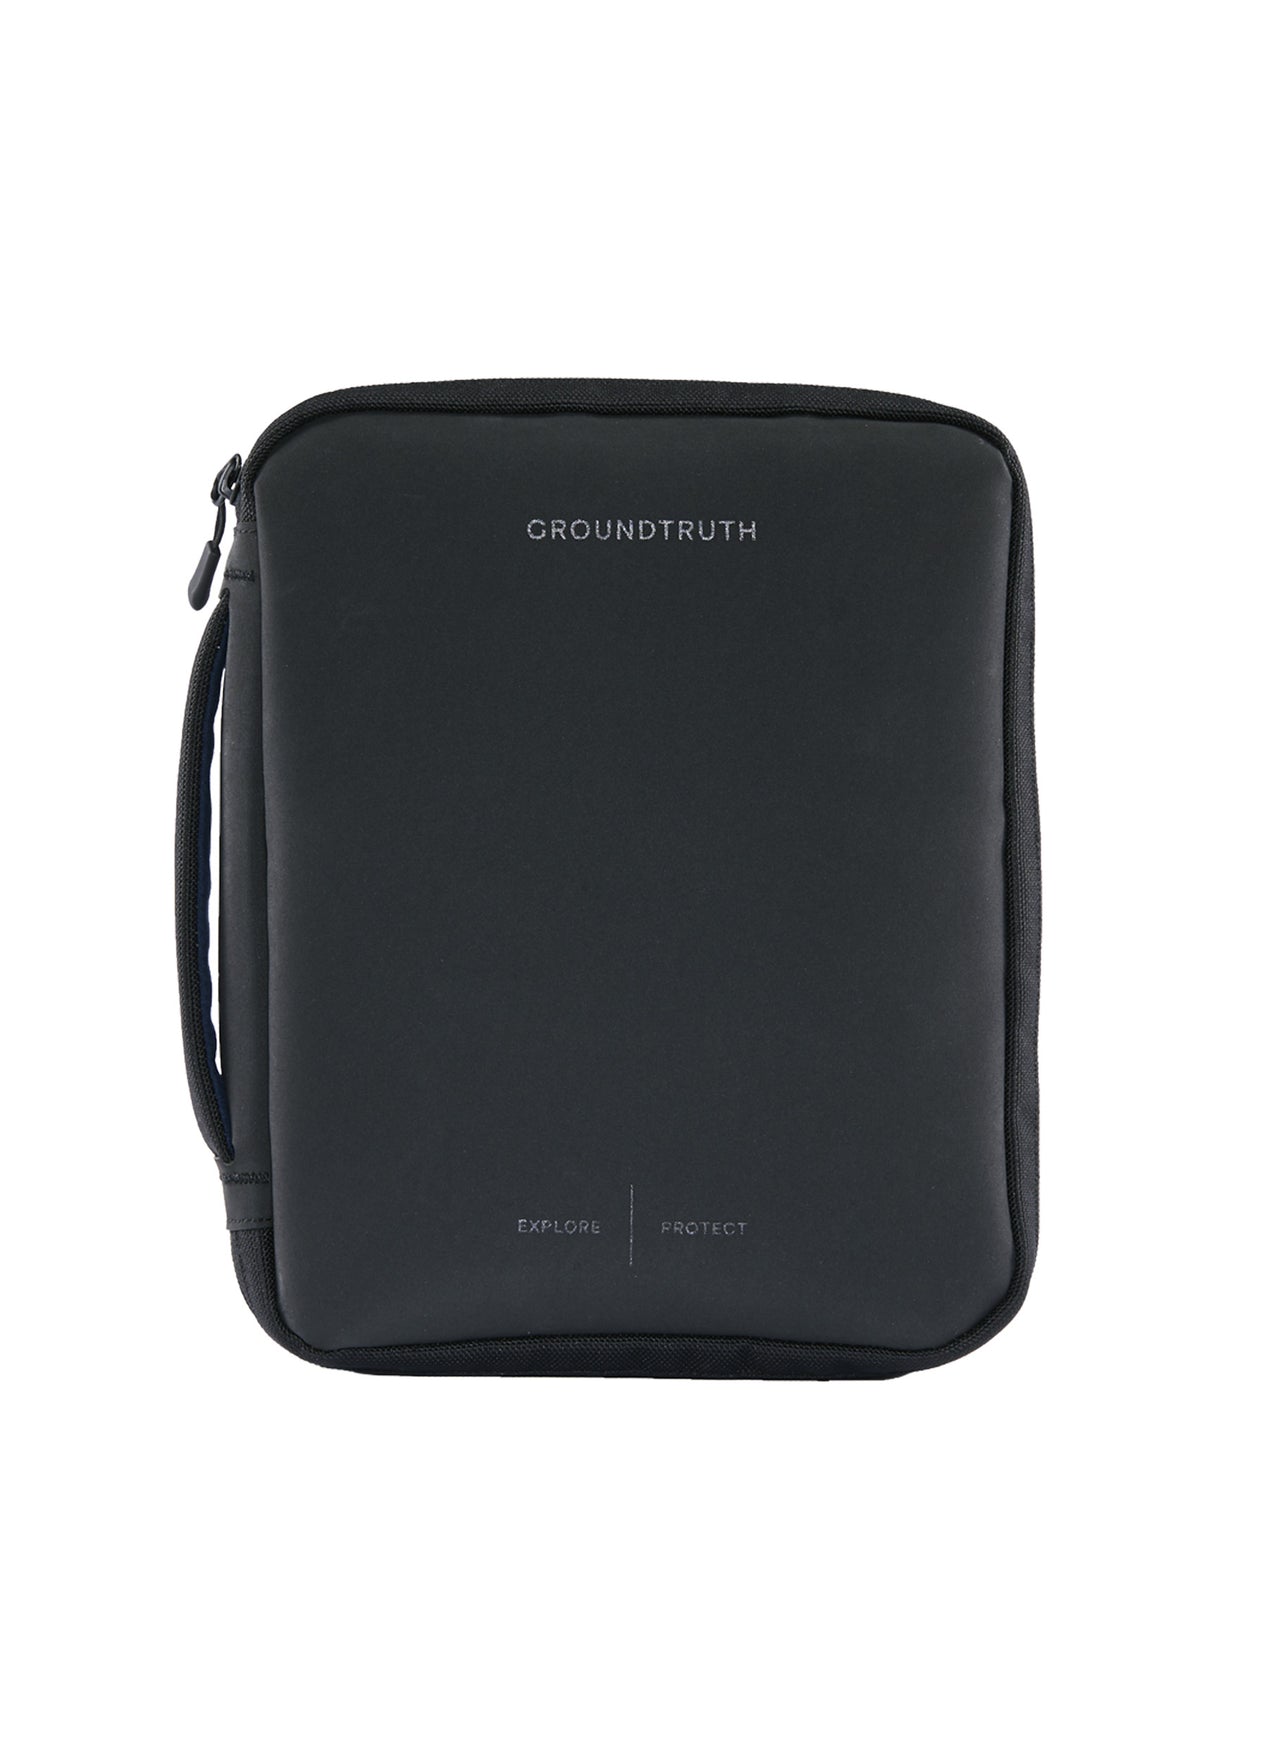 Groundtruth Range Tech Pouch